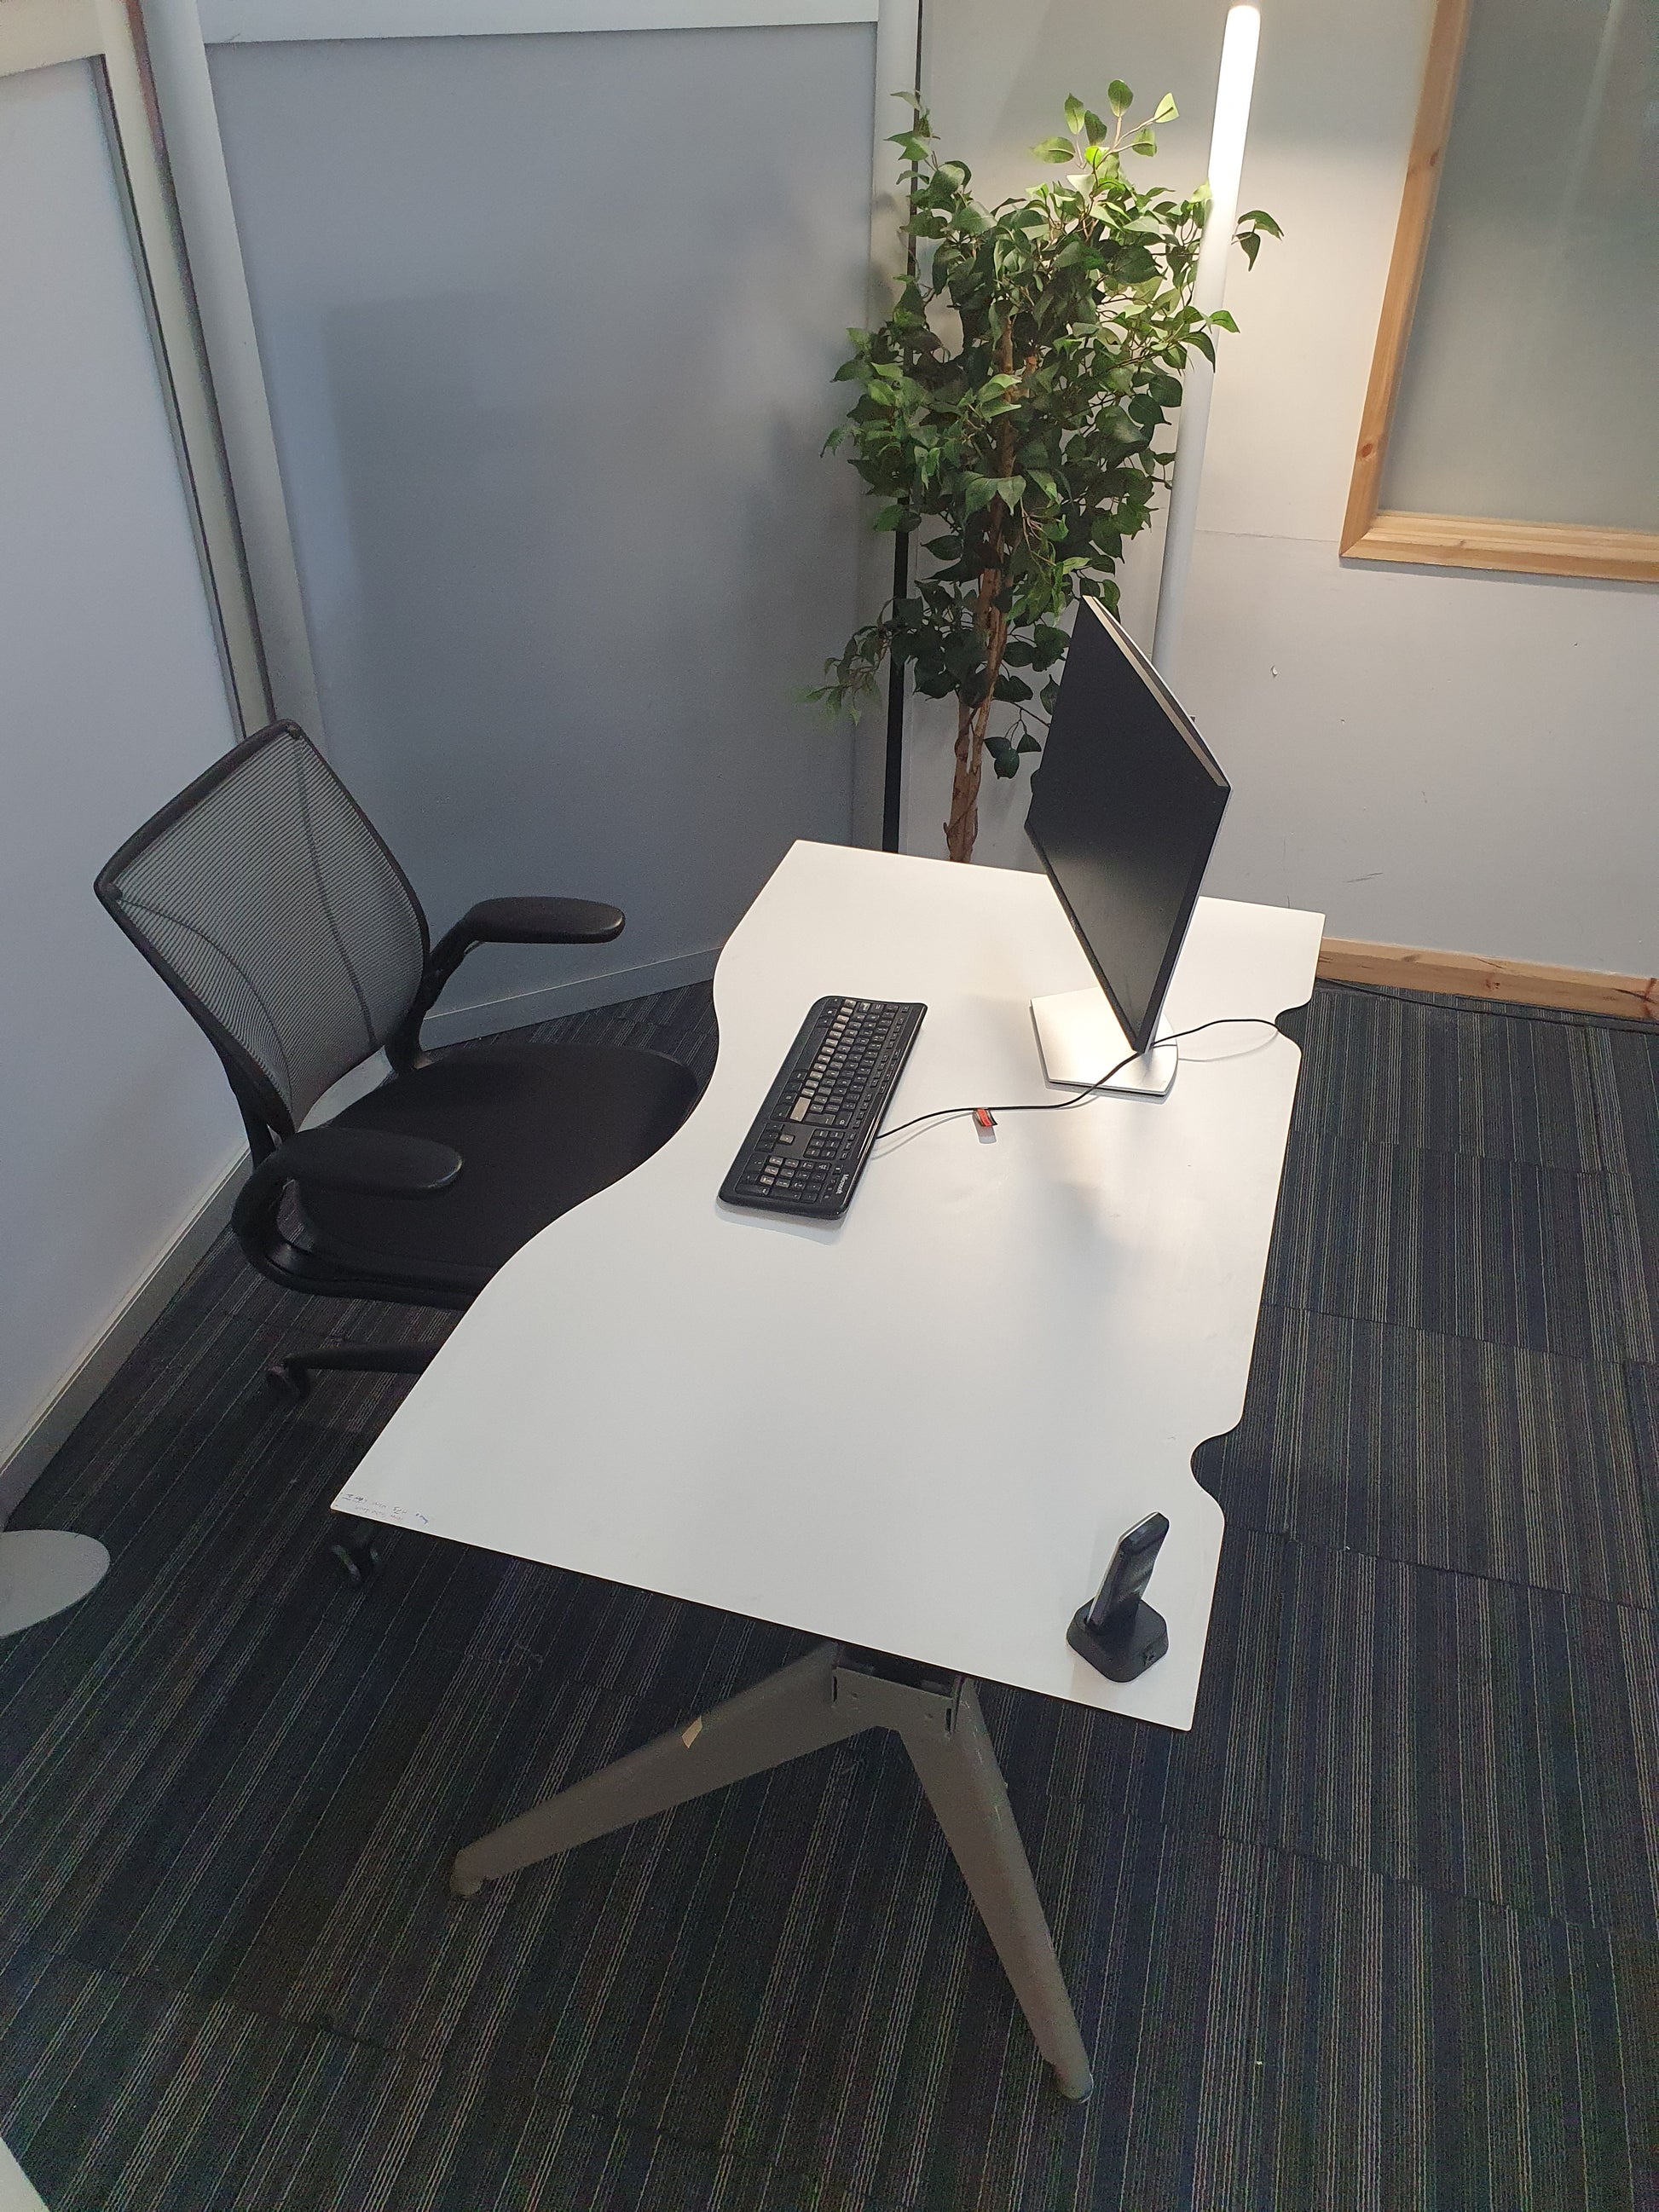 Office Desk with black chair, computer setup and tall green plant